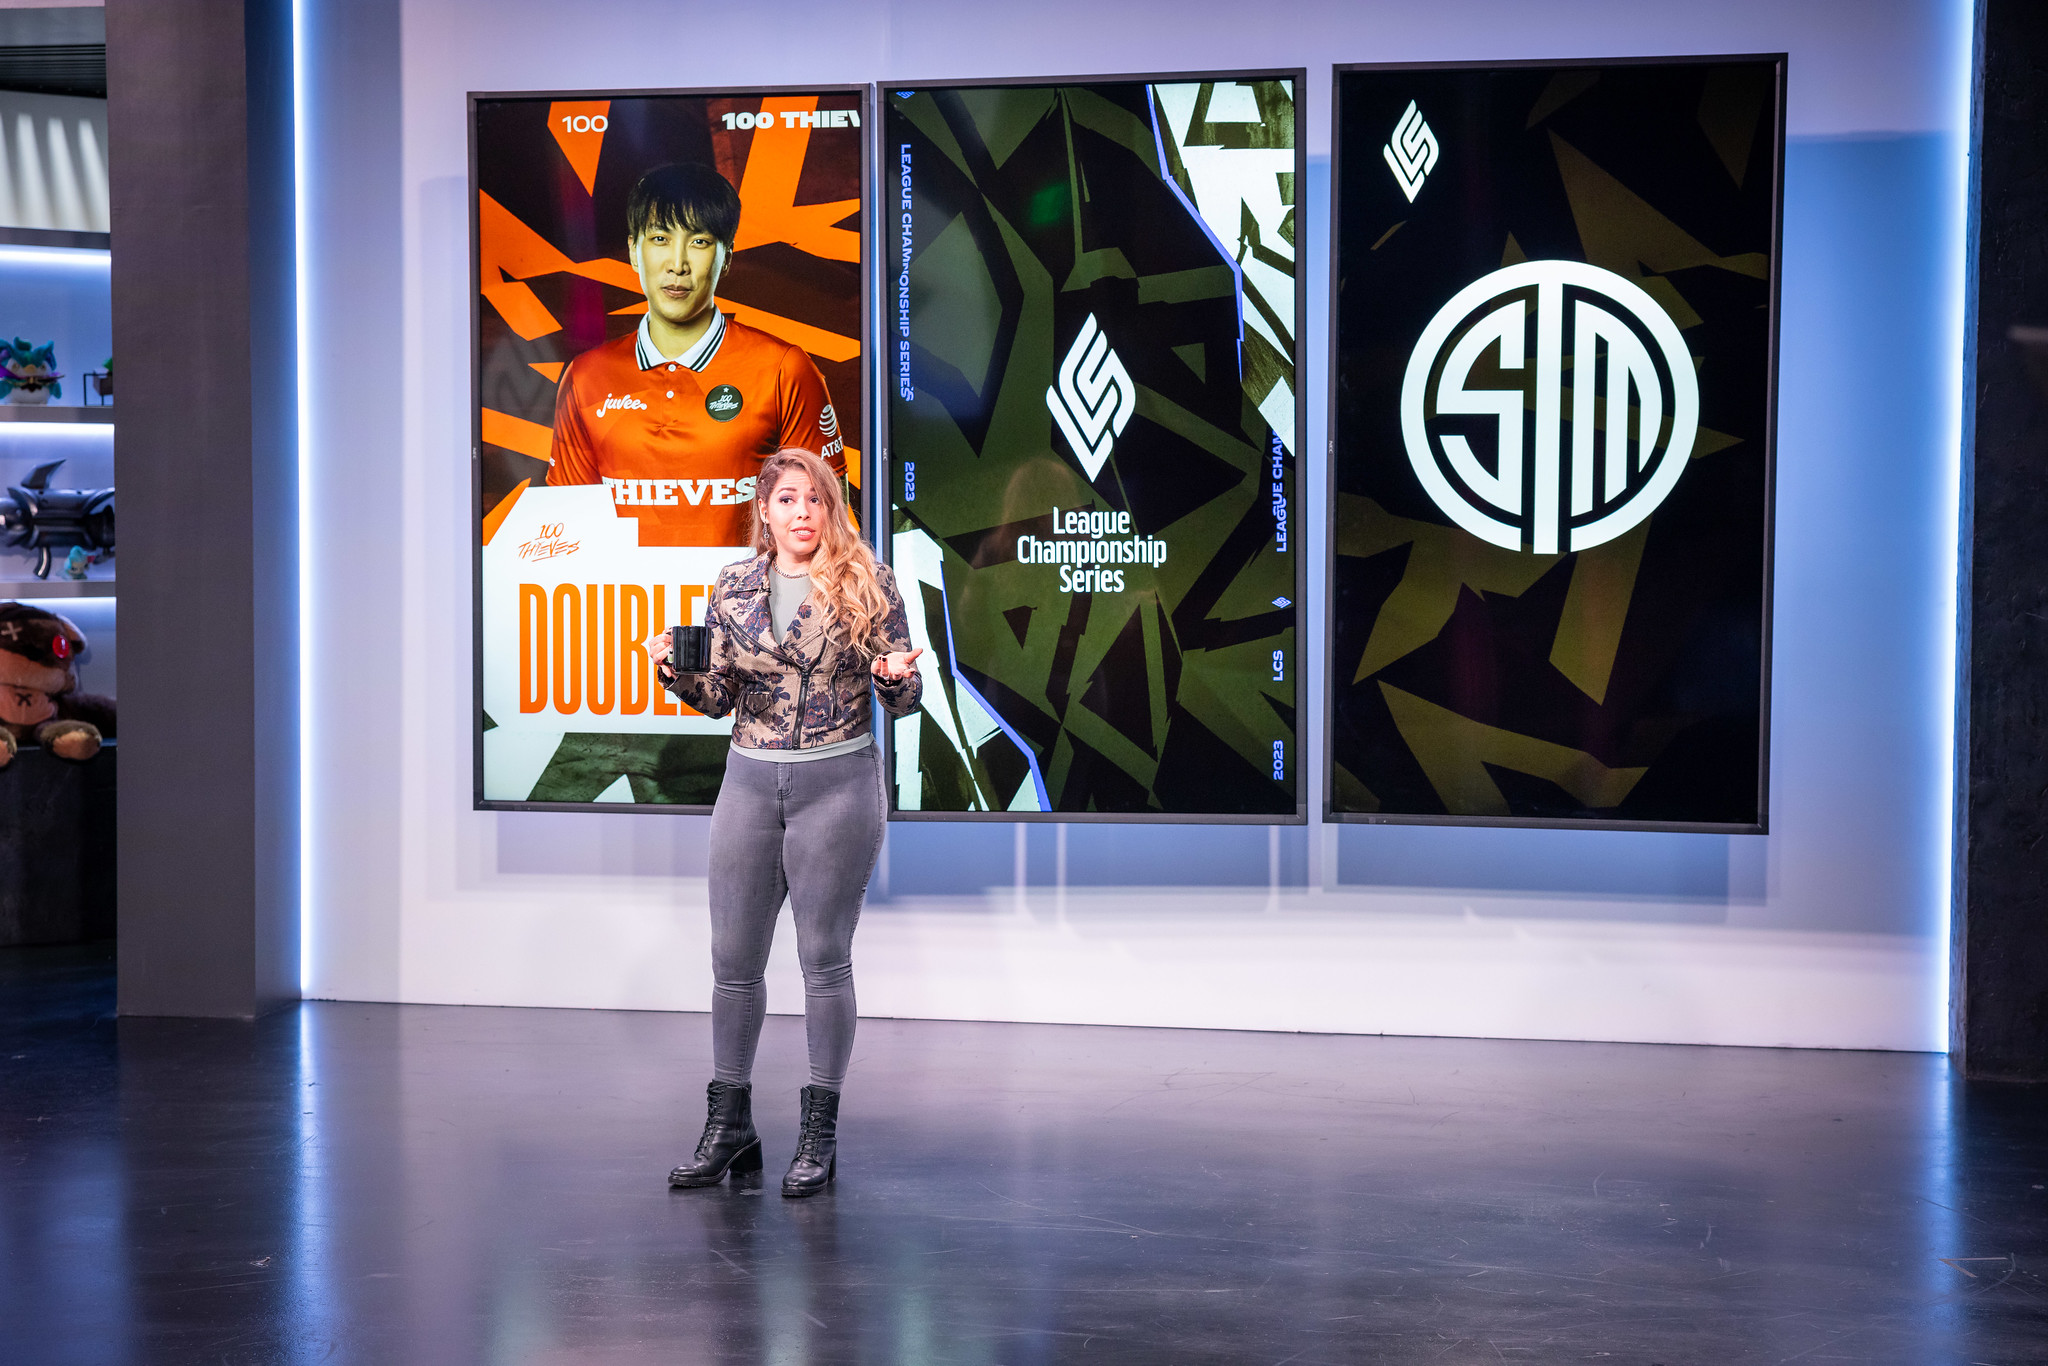 LeTigress temporarily stepping back from LCS following TSM-Doublelift segment backlash - Dot Esports (Picture 1)